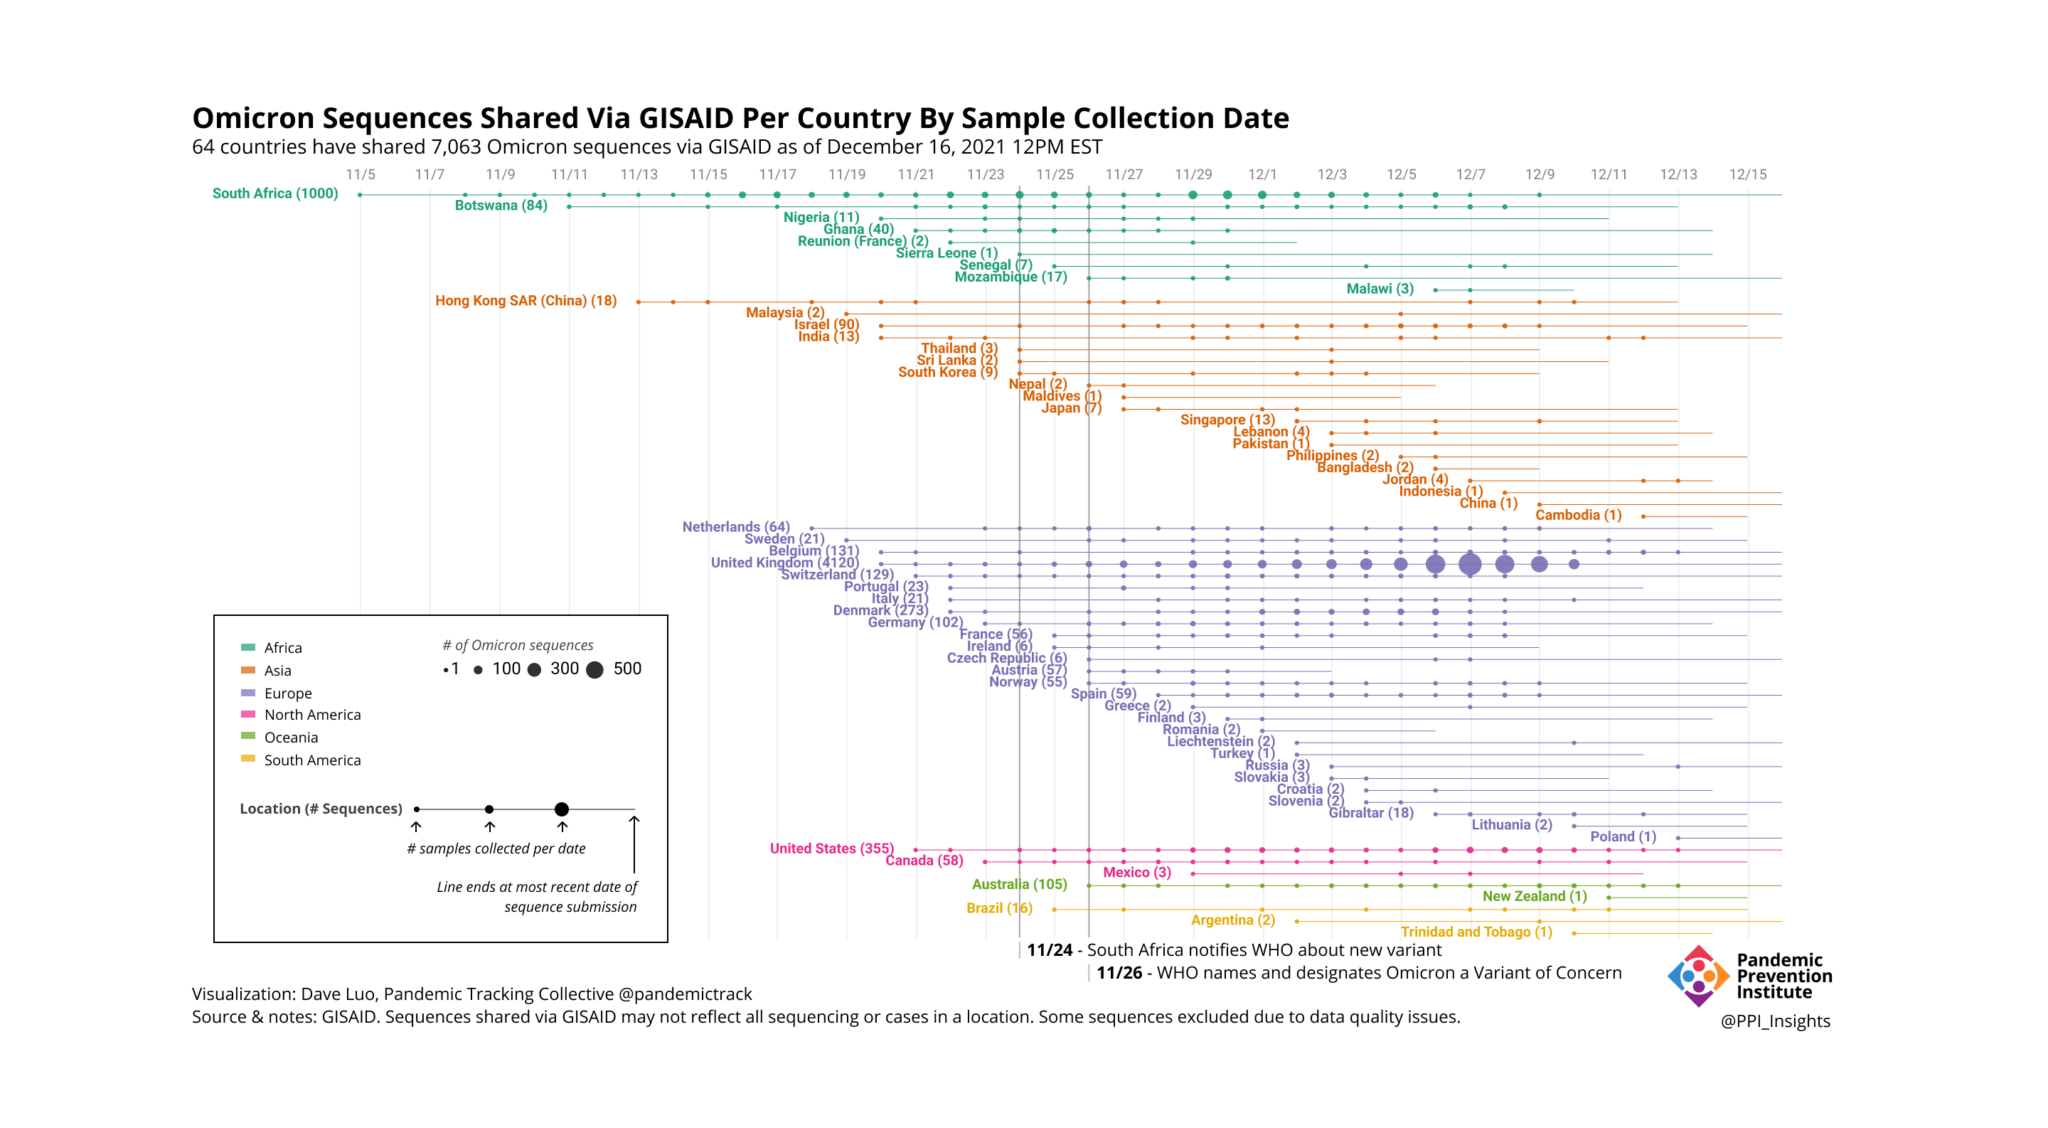 Line and dot chart showing the earliest sample collection date and number of Omicron sequences shared for all 64 countries sharing Omicron sequences to GISAID from 11/5/21 to 12/16/21.